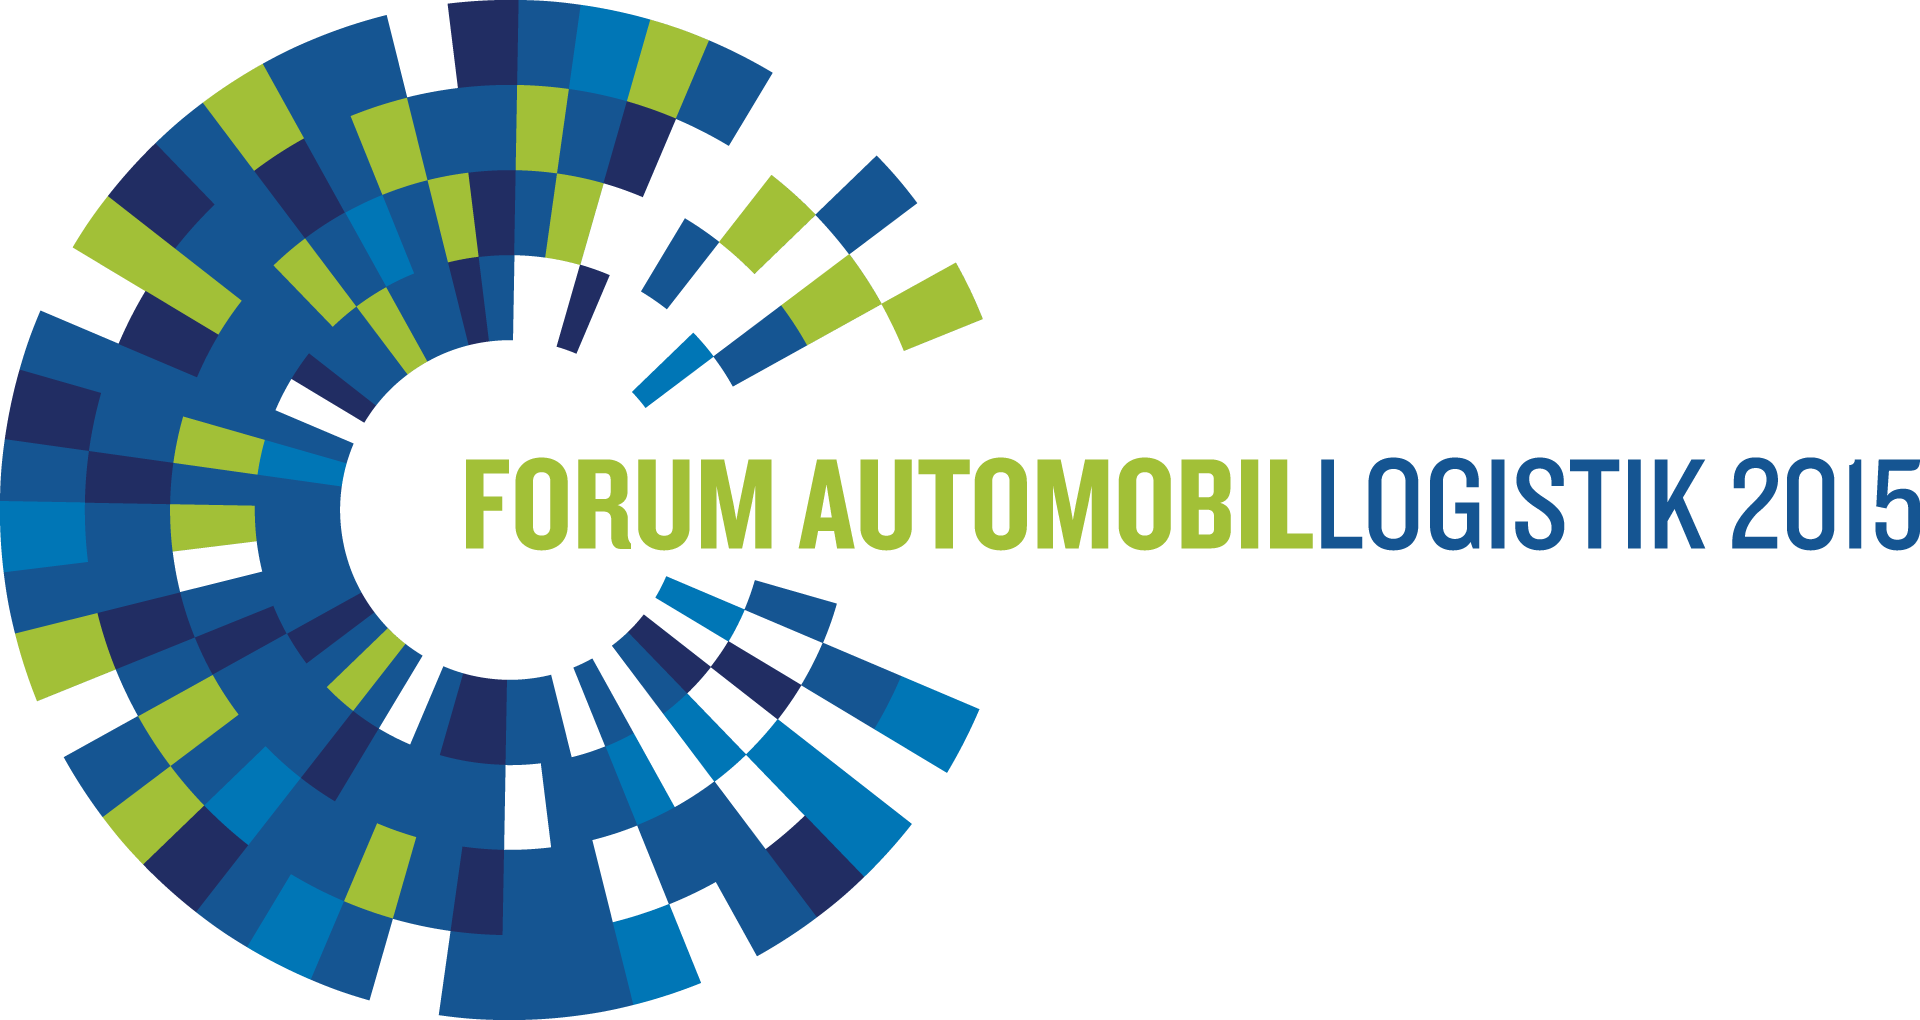 Welcome To The Automotive Logistics Forum - 2018 (1920x1020)